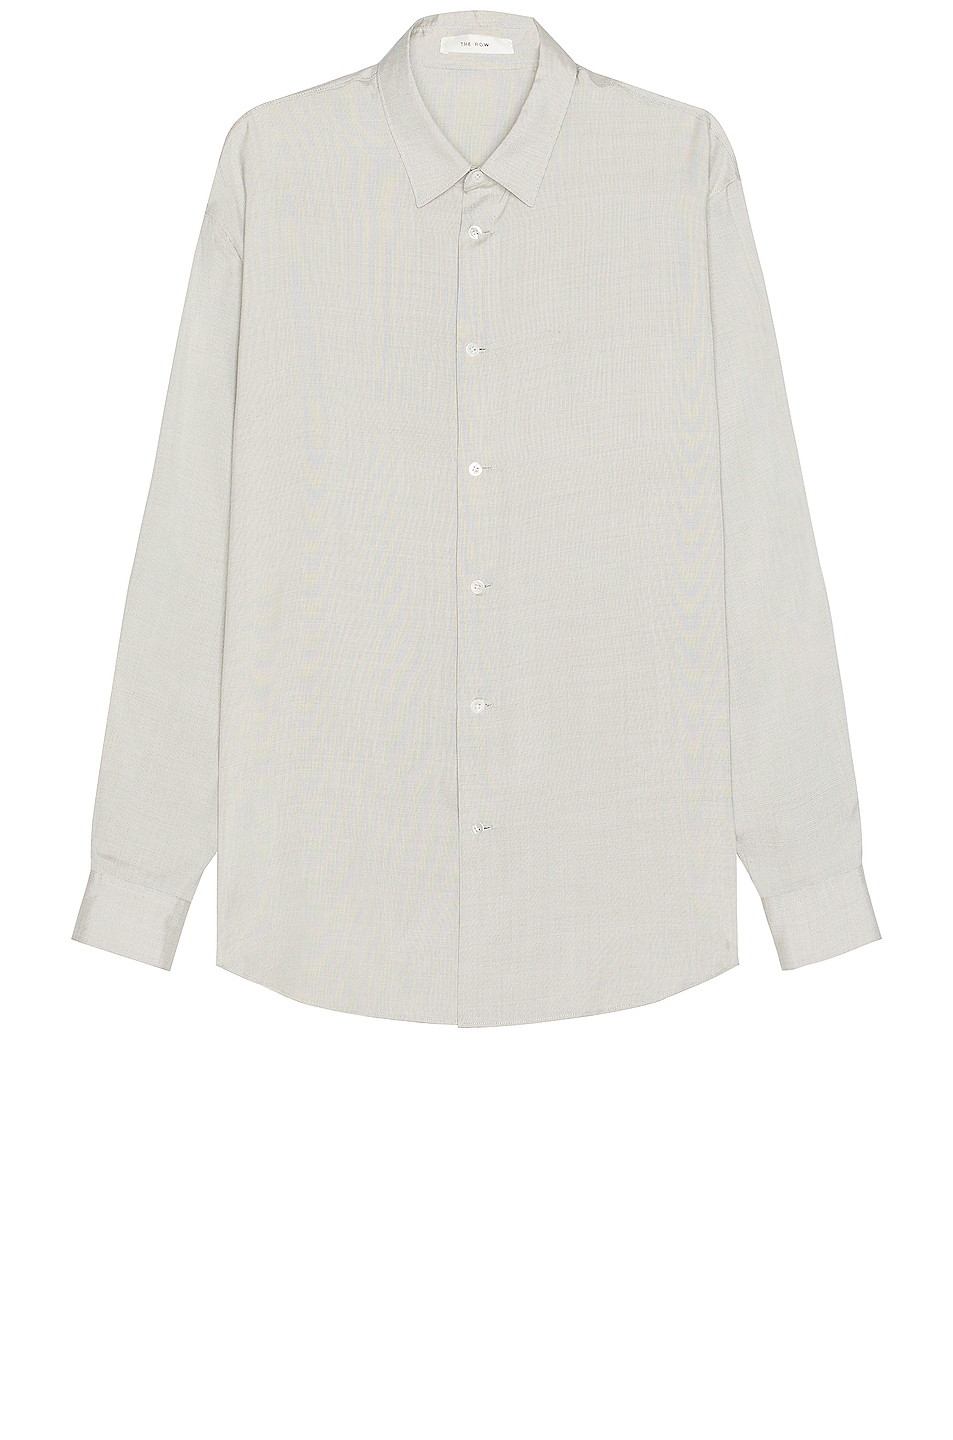 Image 1 of The Row Giorgio Shirt in Rattan